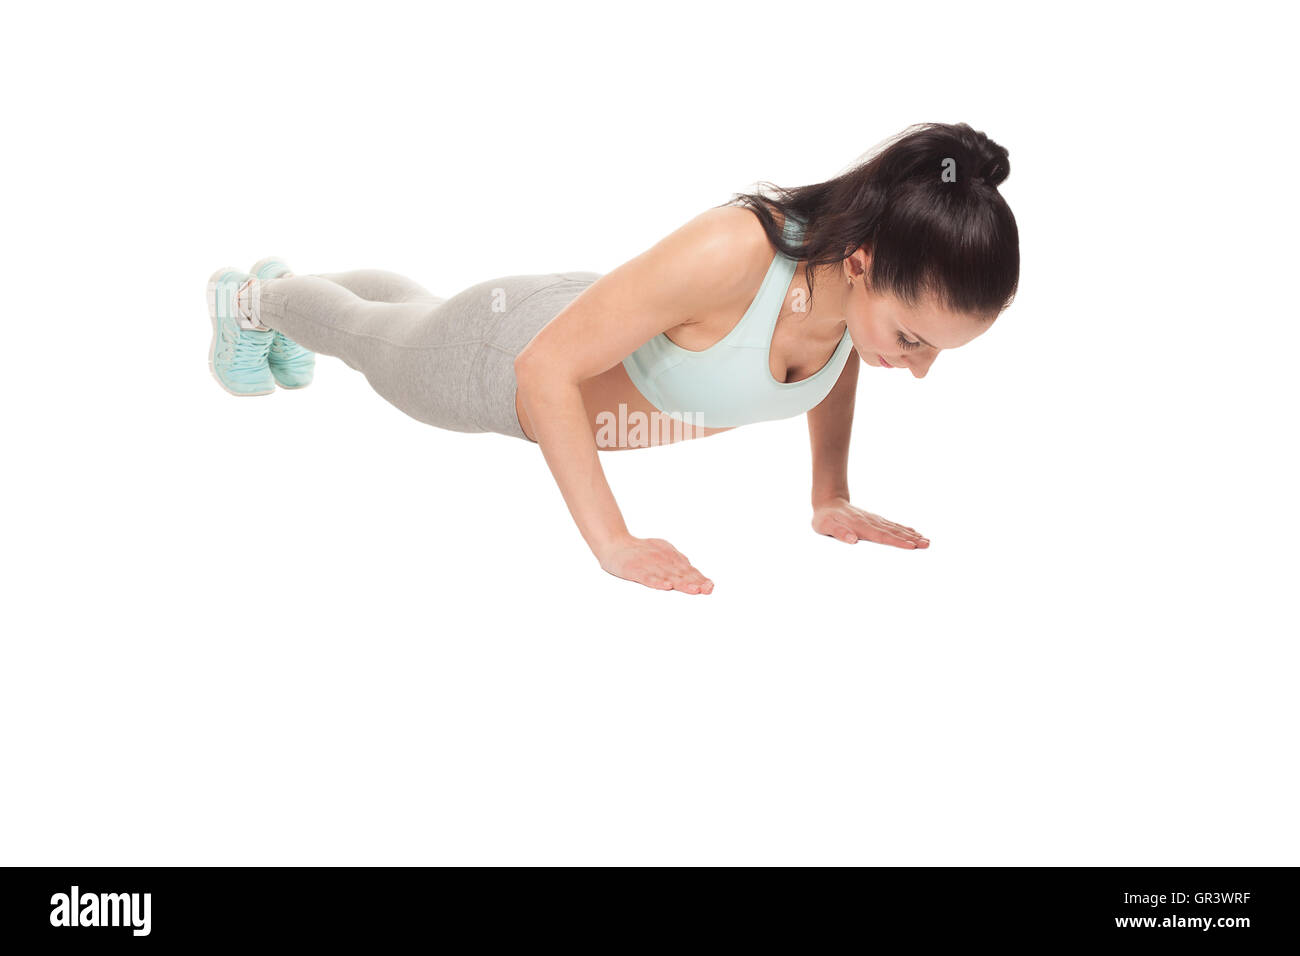 athletic woman doing push-ups on a white background. Fitness model with a beautiful, athletic body Stock Photo